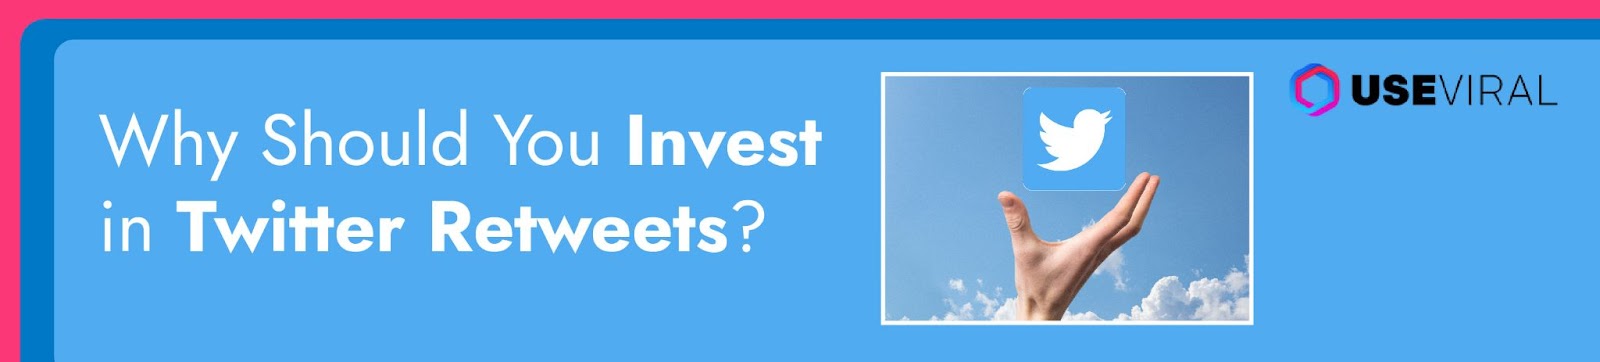 Why Should You Invest in Twitter Retweets? 